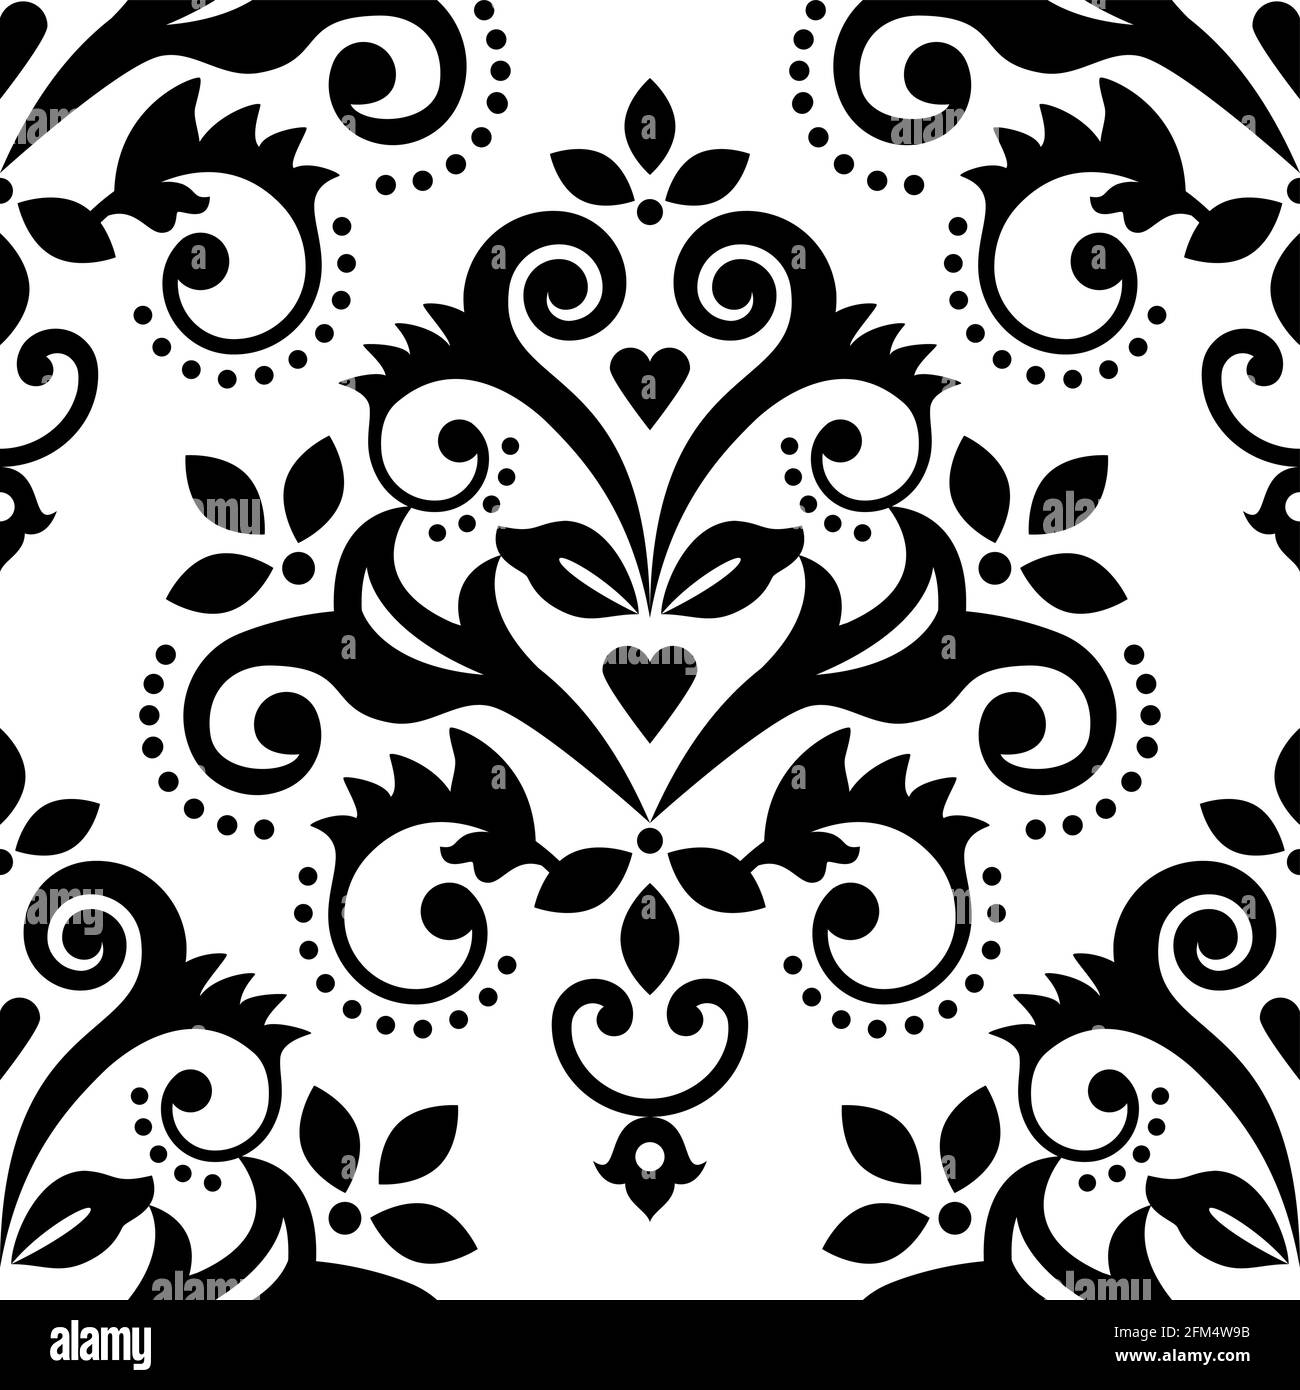 Damask tiled wallpaper, black and white textile or fabric print pattern, traditional vector design with flowers, leaves and swirls Stock Vector